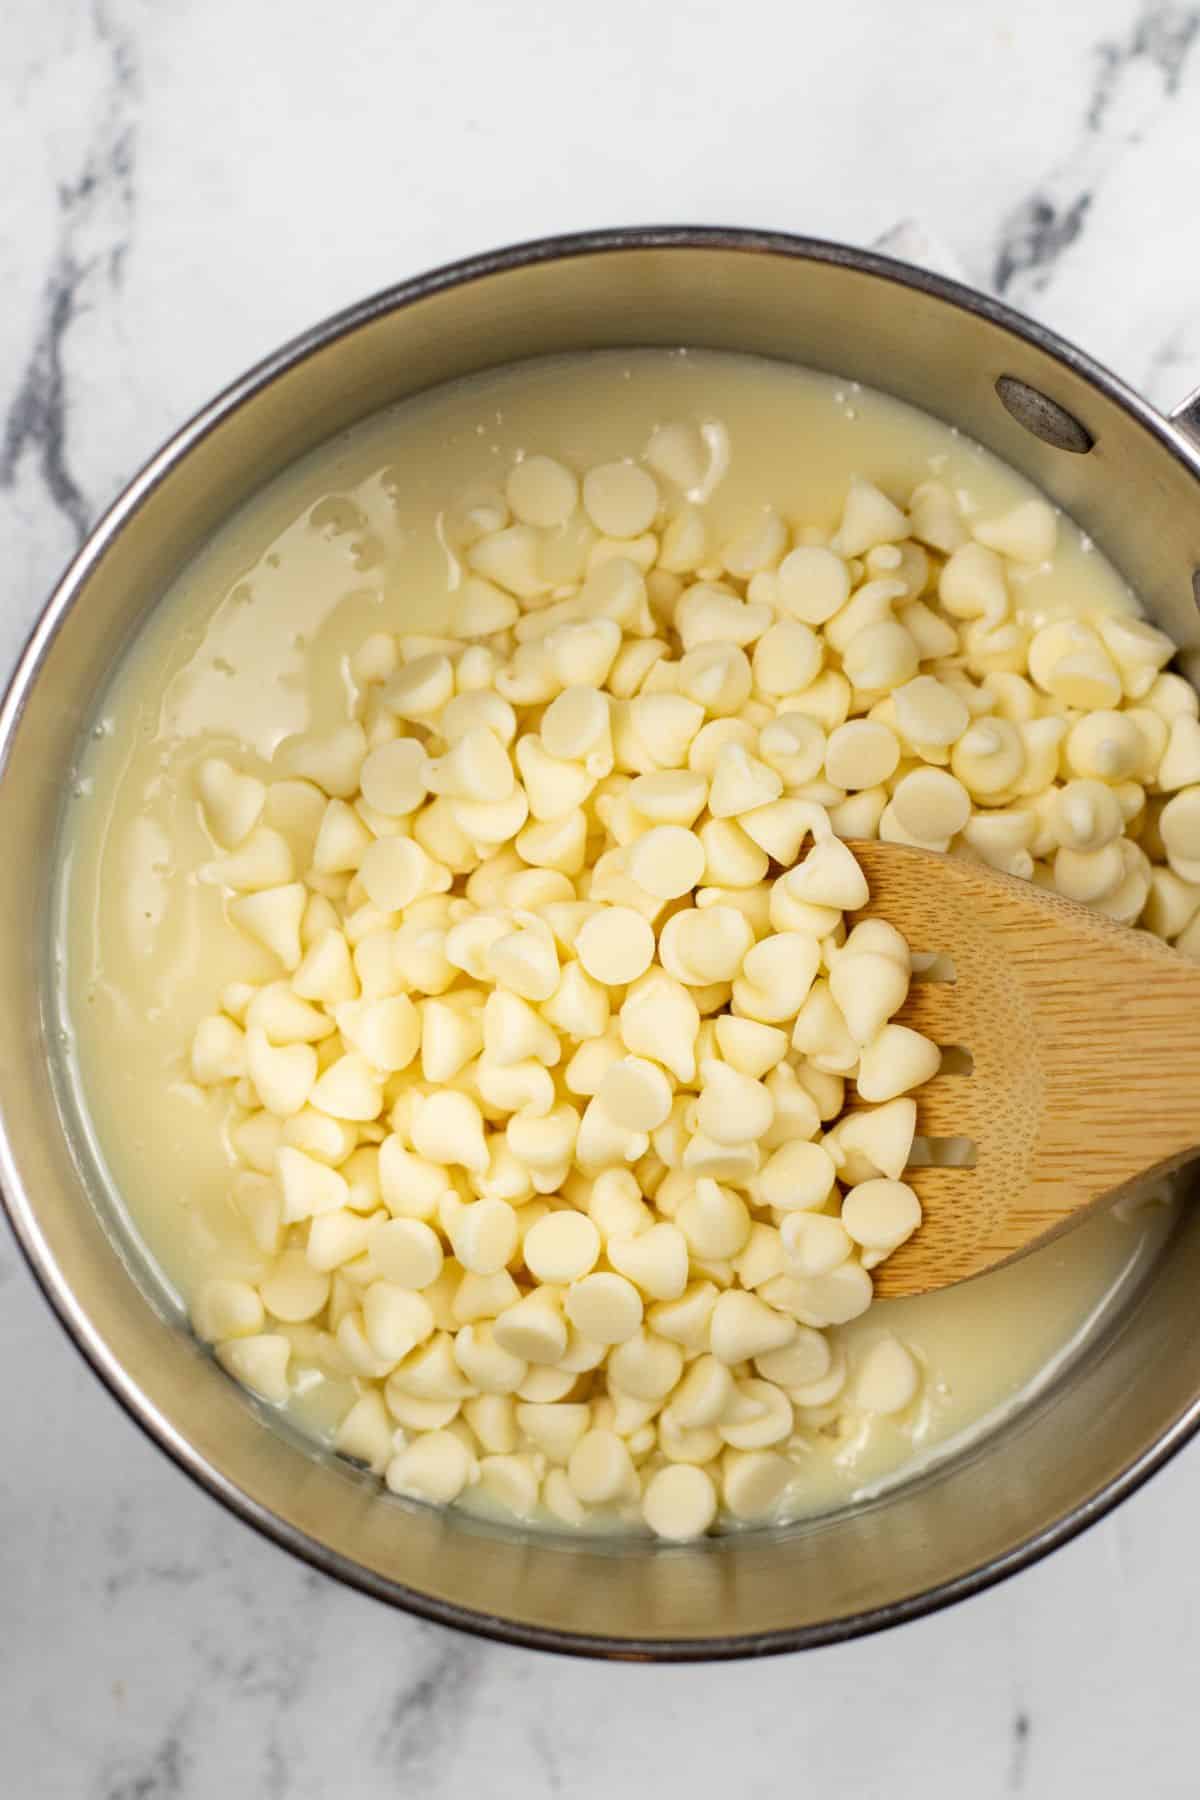 white chocolate chips in sauce pan with condensed milk